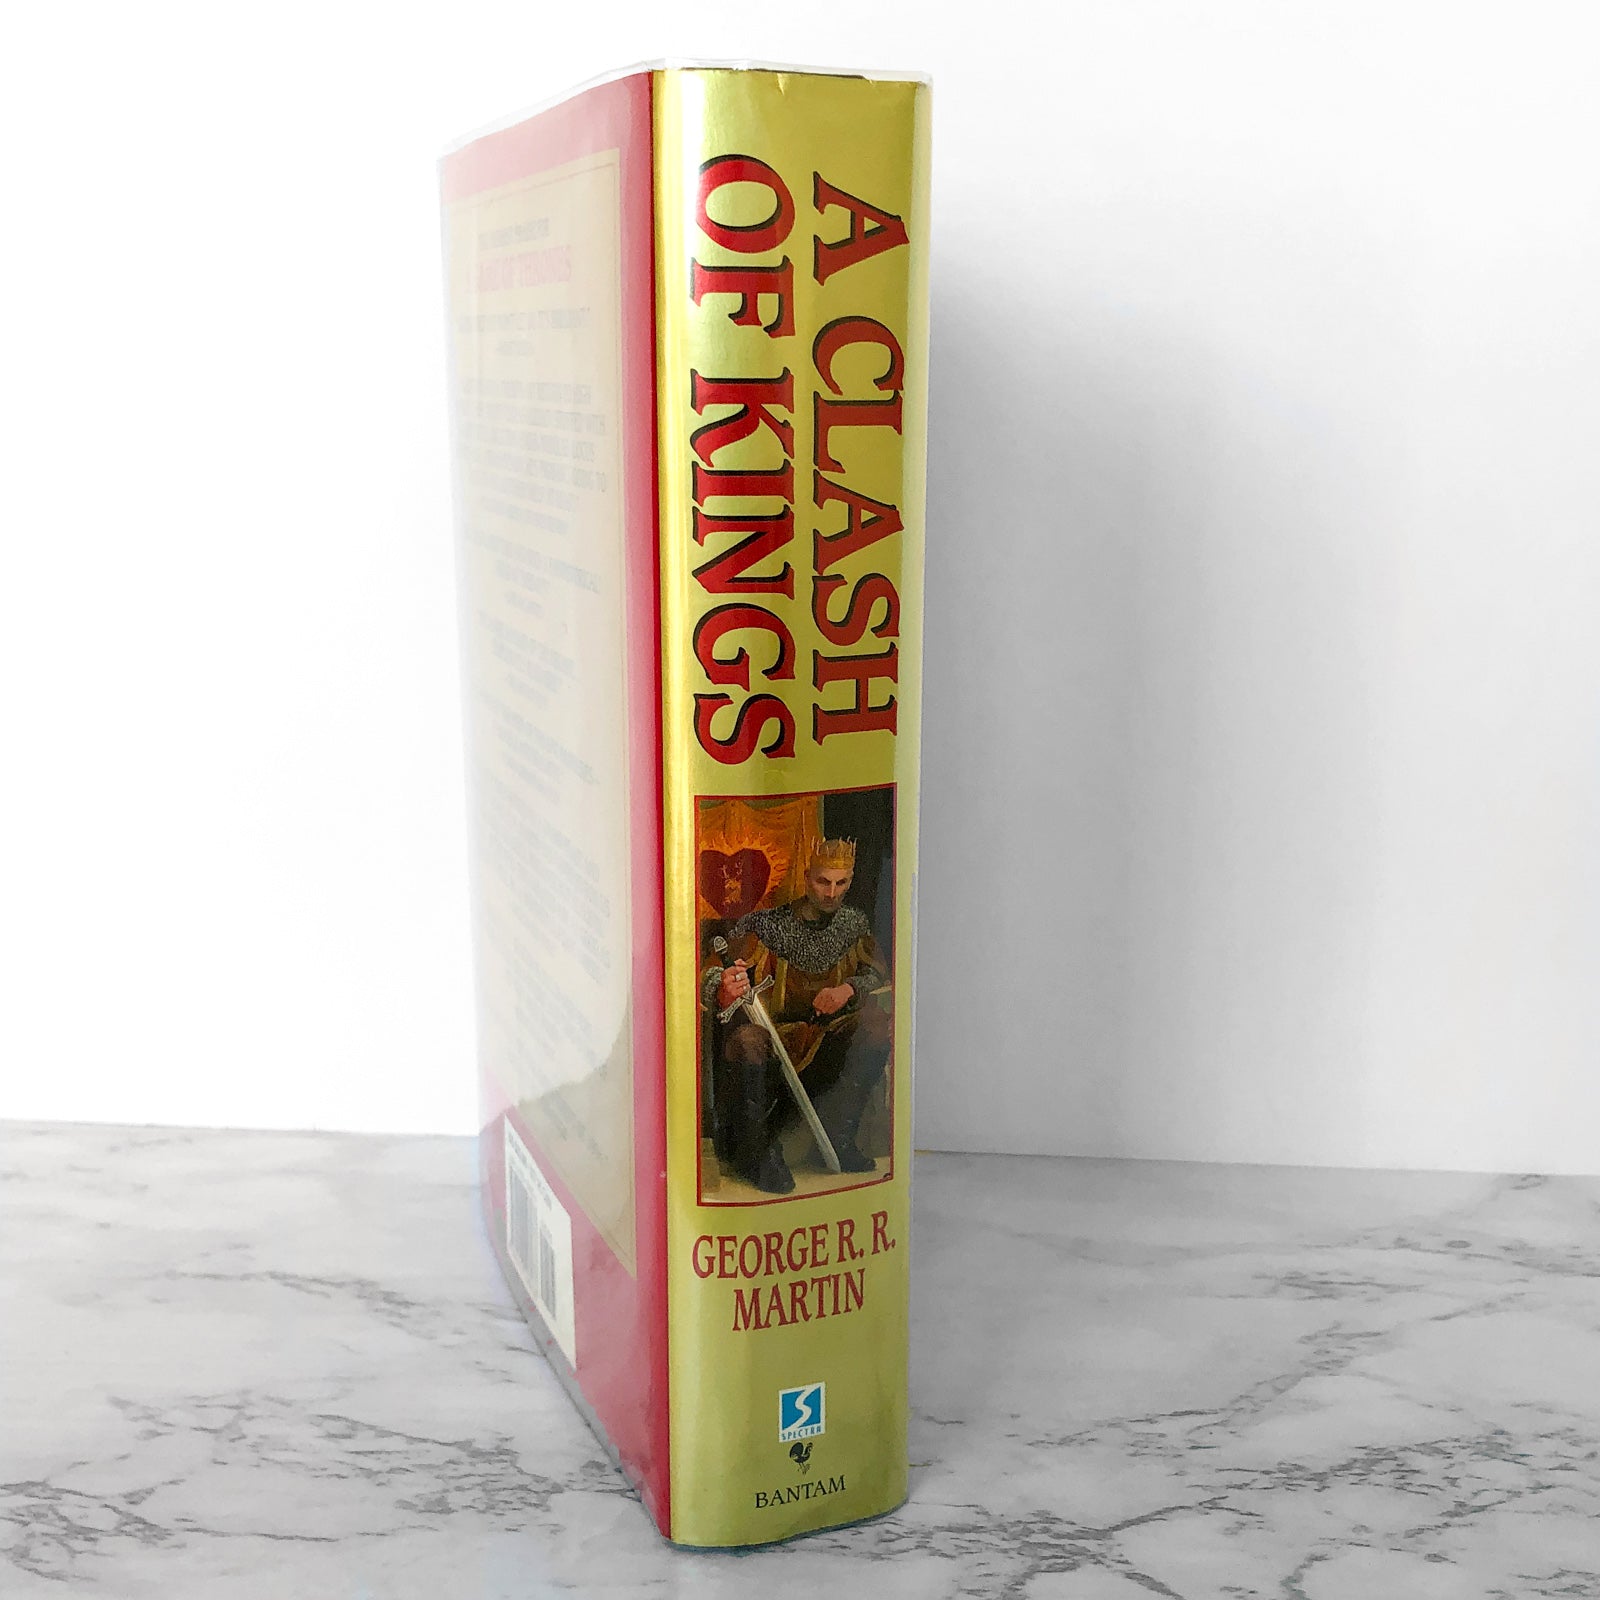 A Clash of Kings (A Song of Ice and Fire, #2) by George R.R. Martin